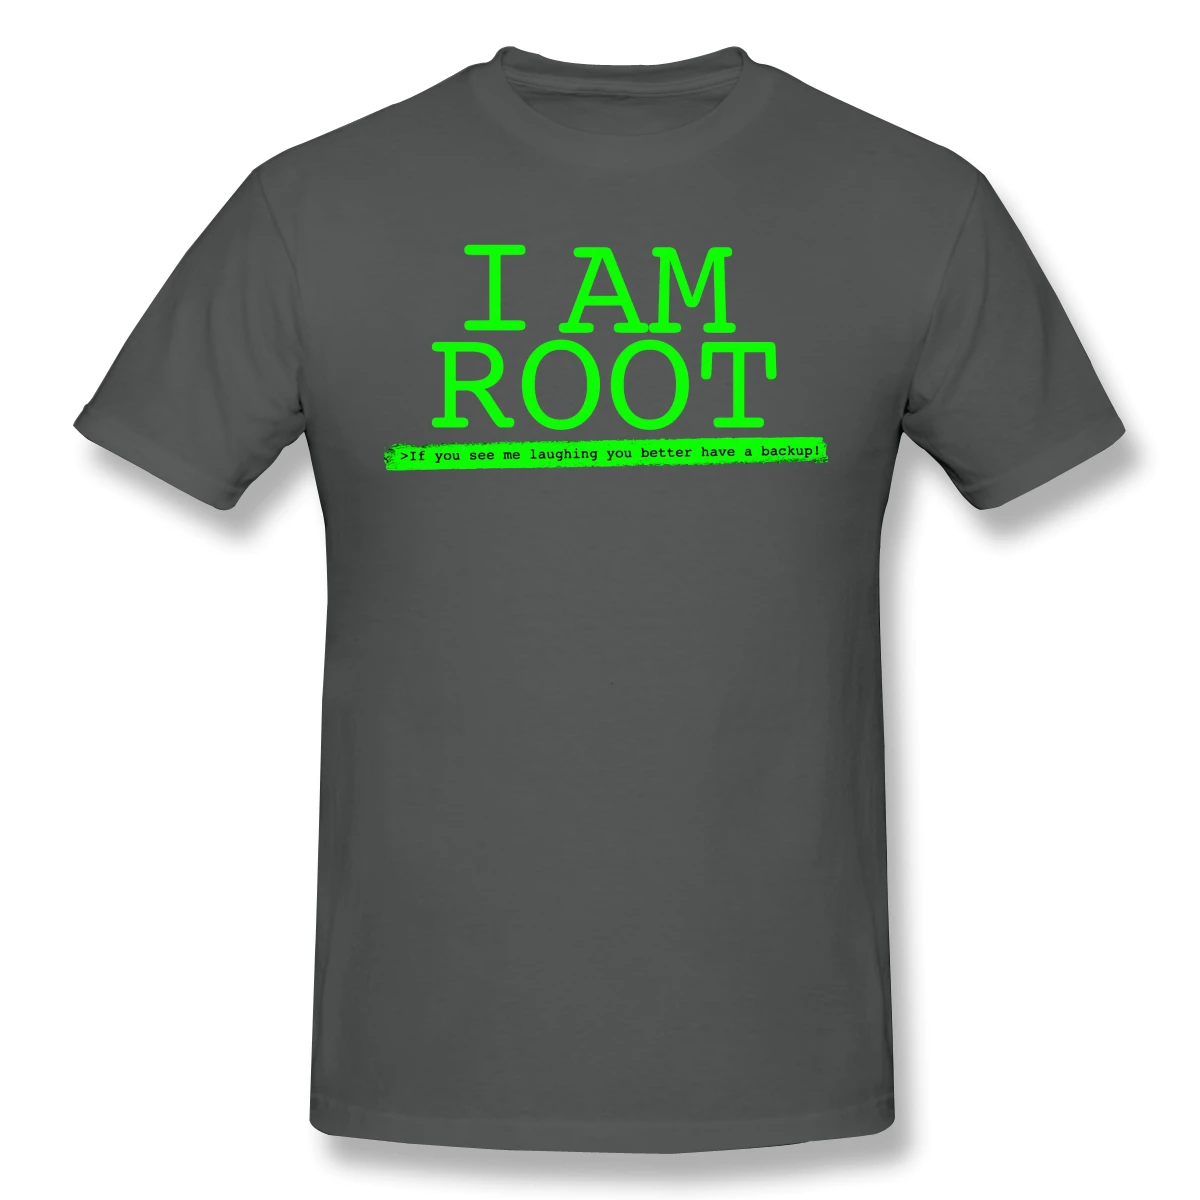 I am rooted